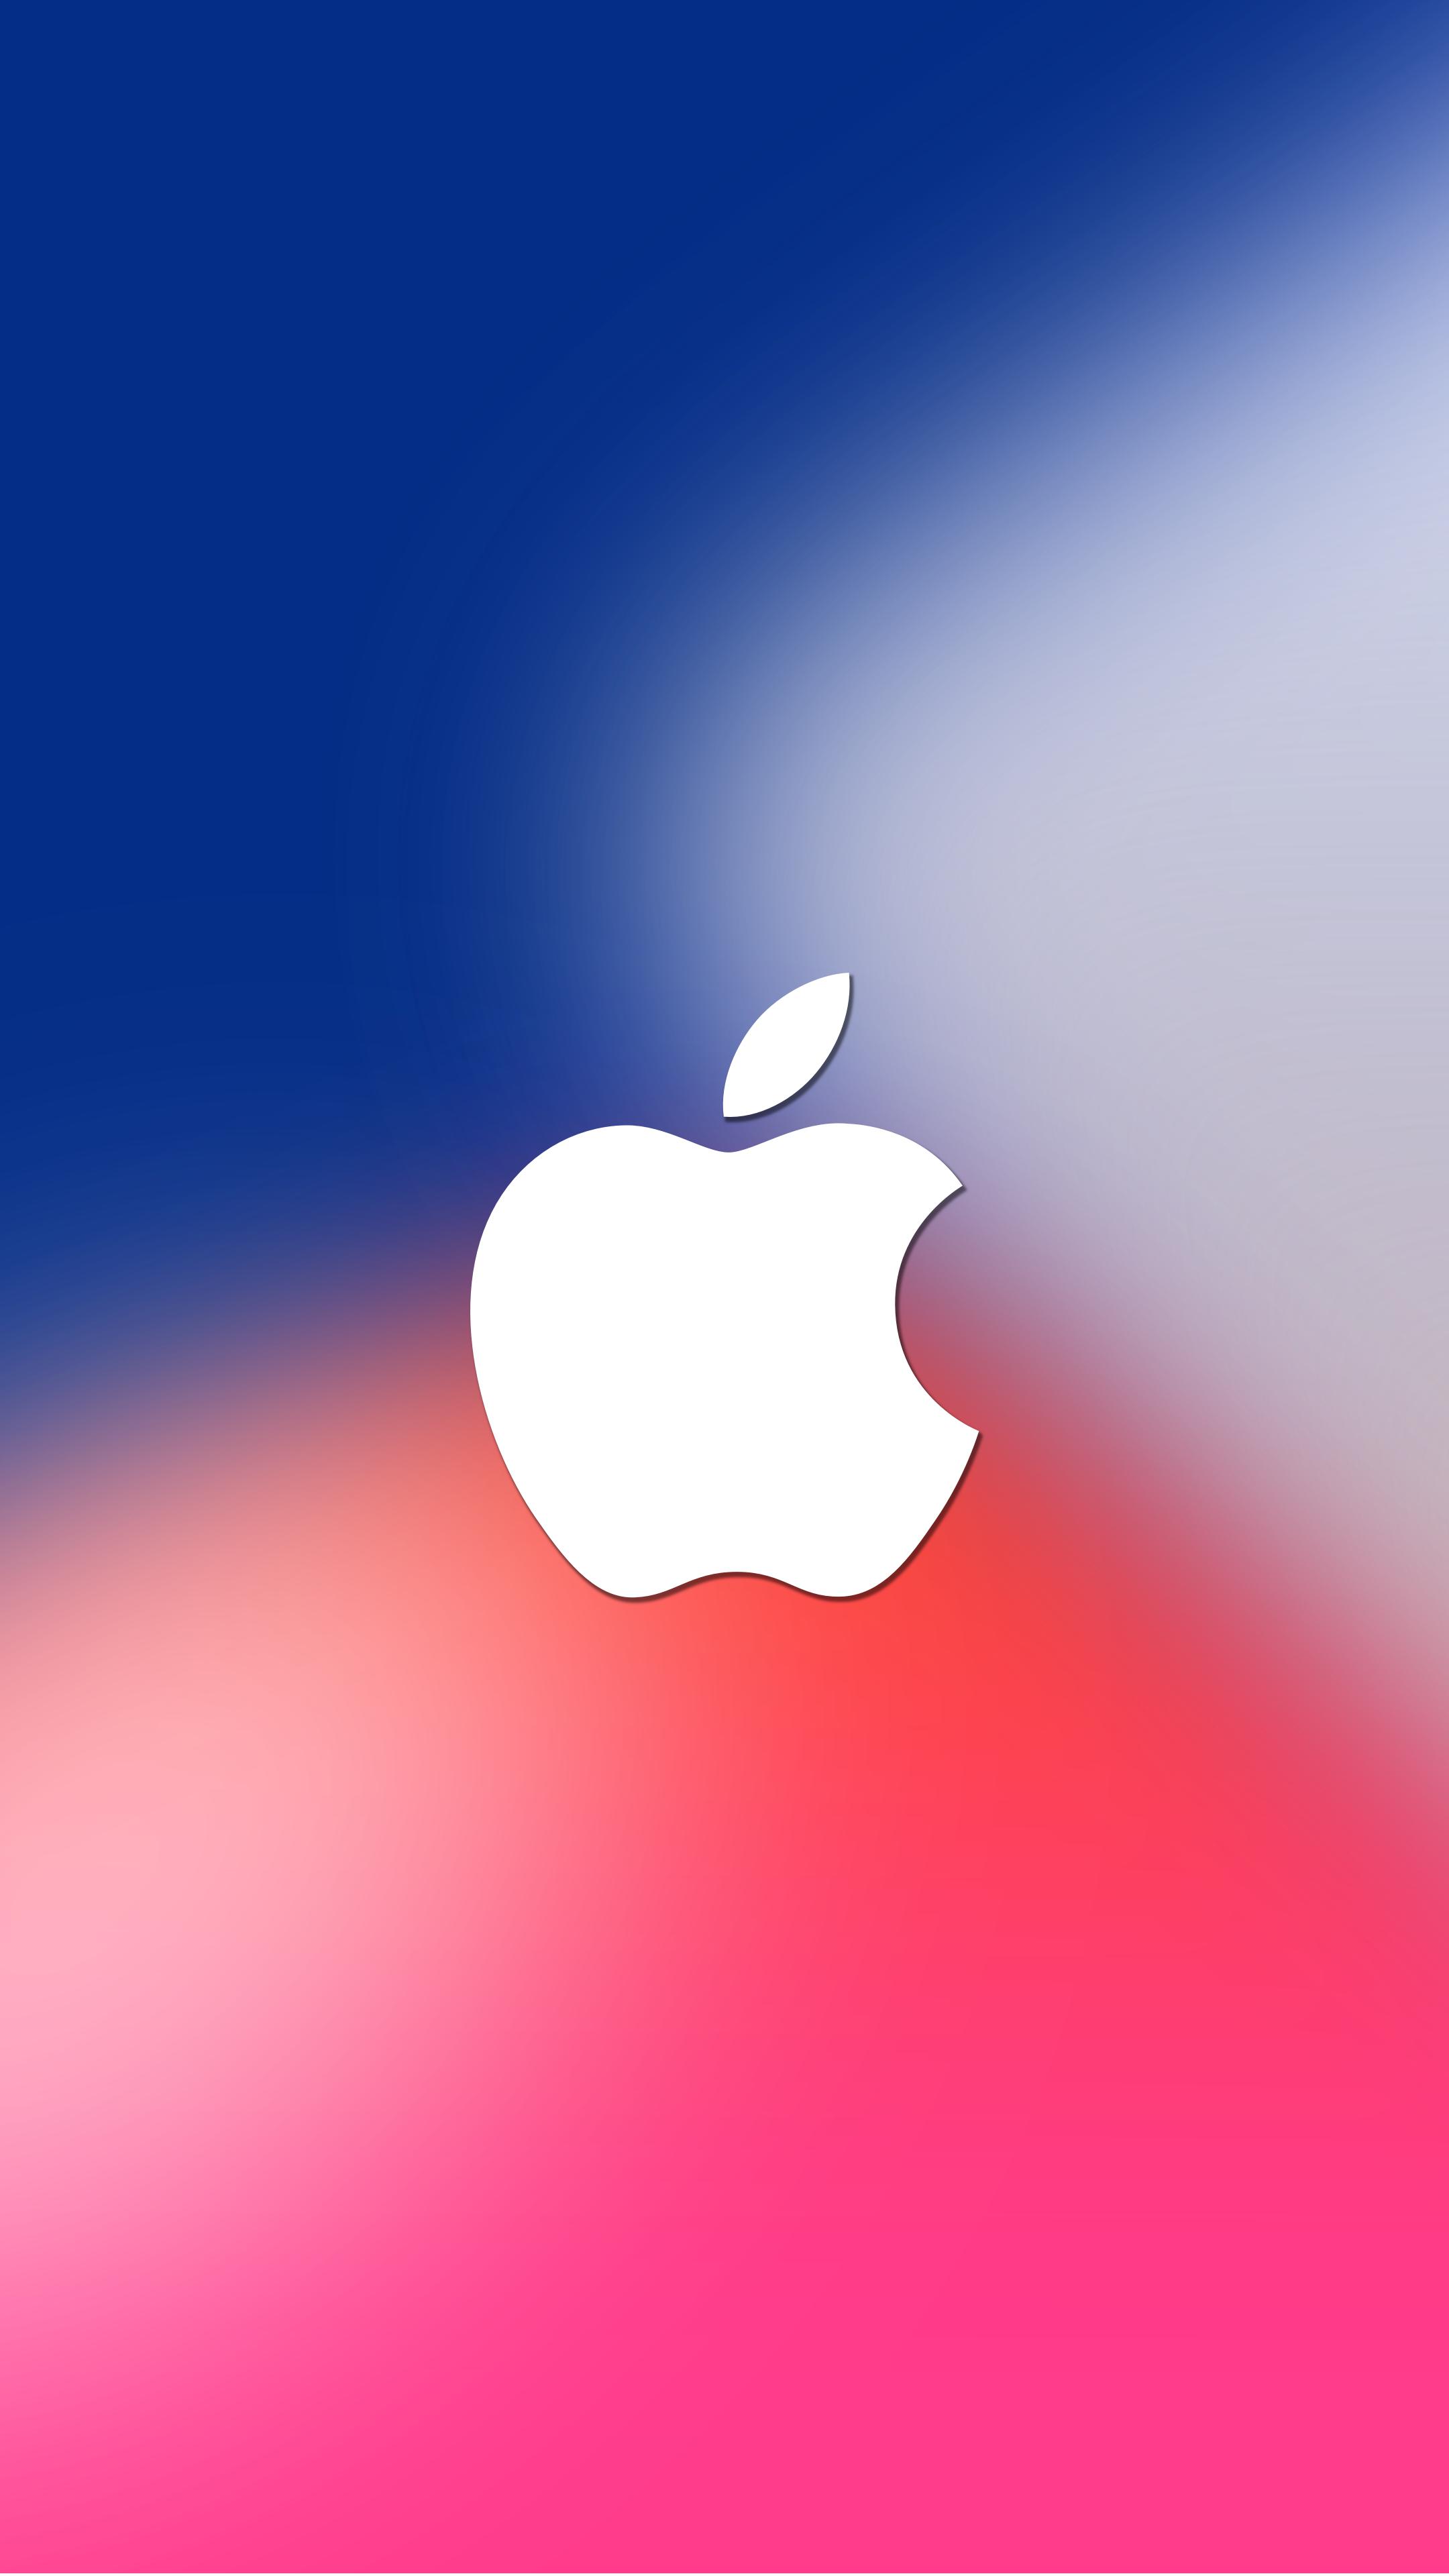 Blueand White Apple Logo - Download September 12 iPhone 8 Event Wallpaper For iPhone, iPad